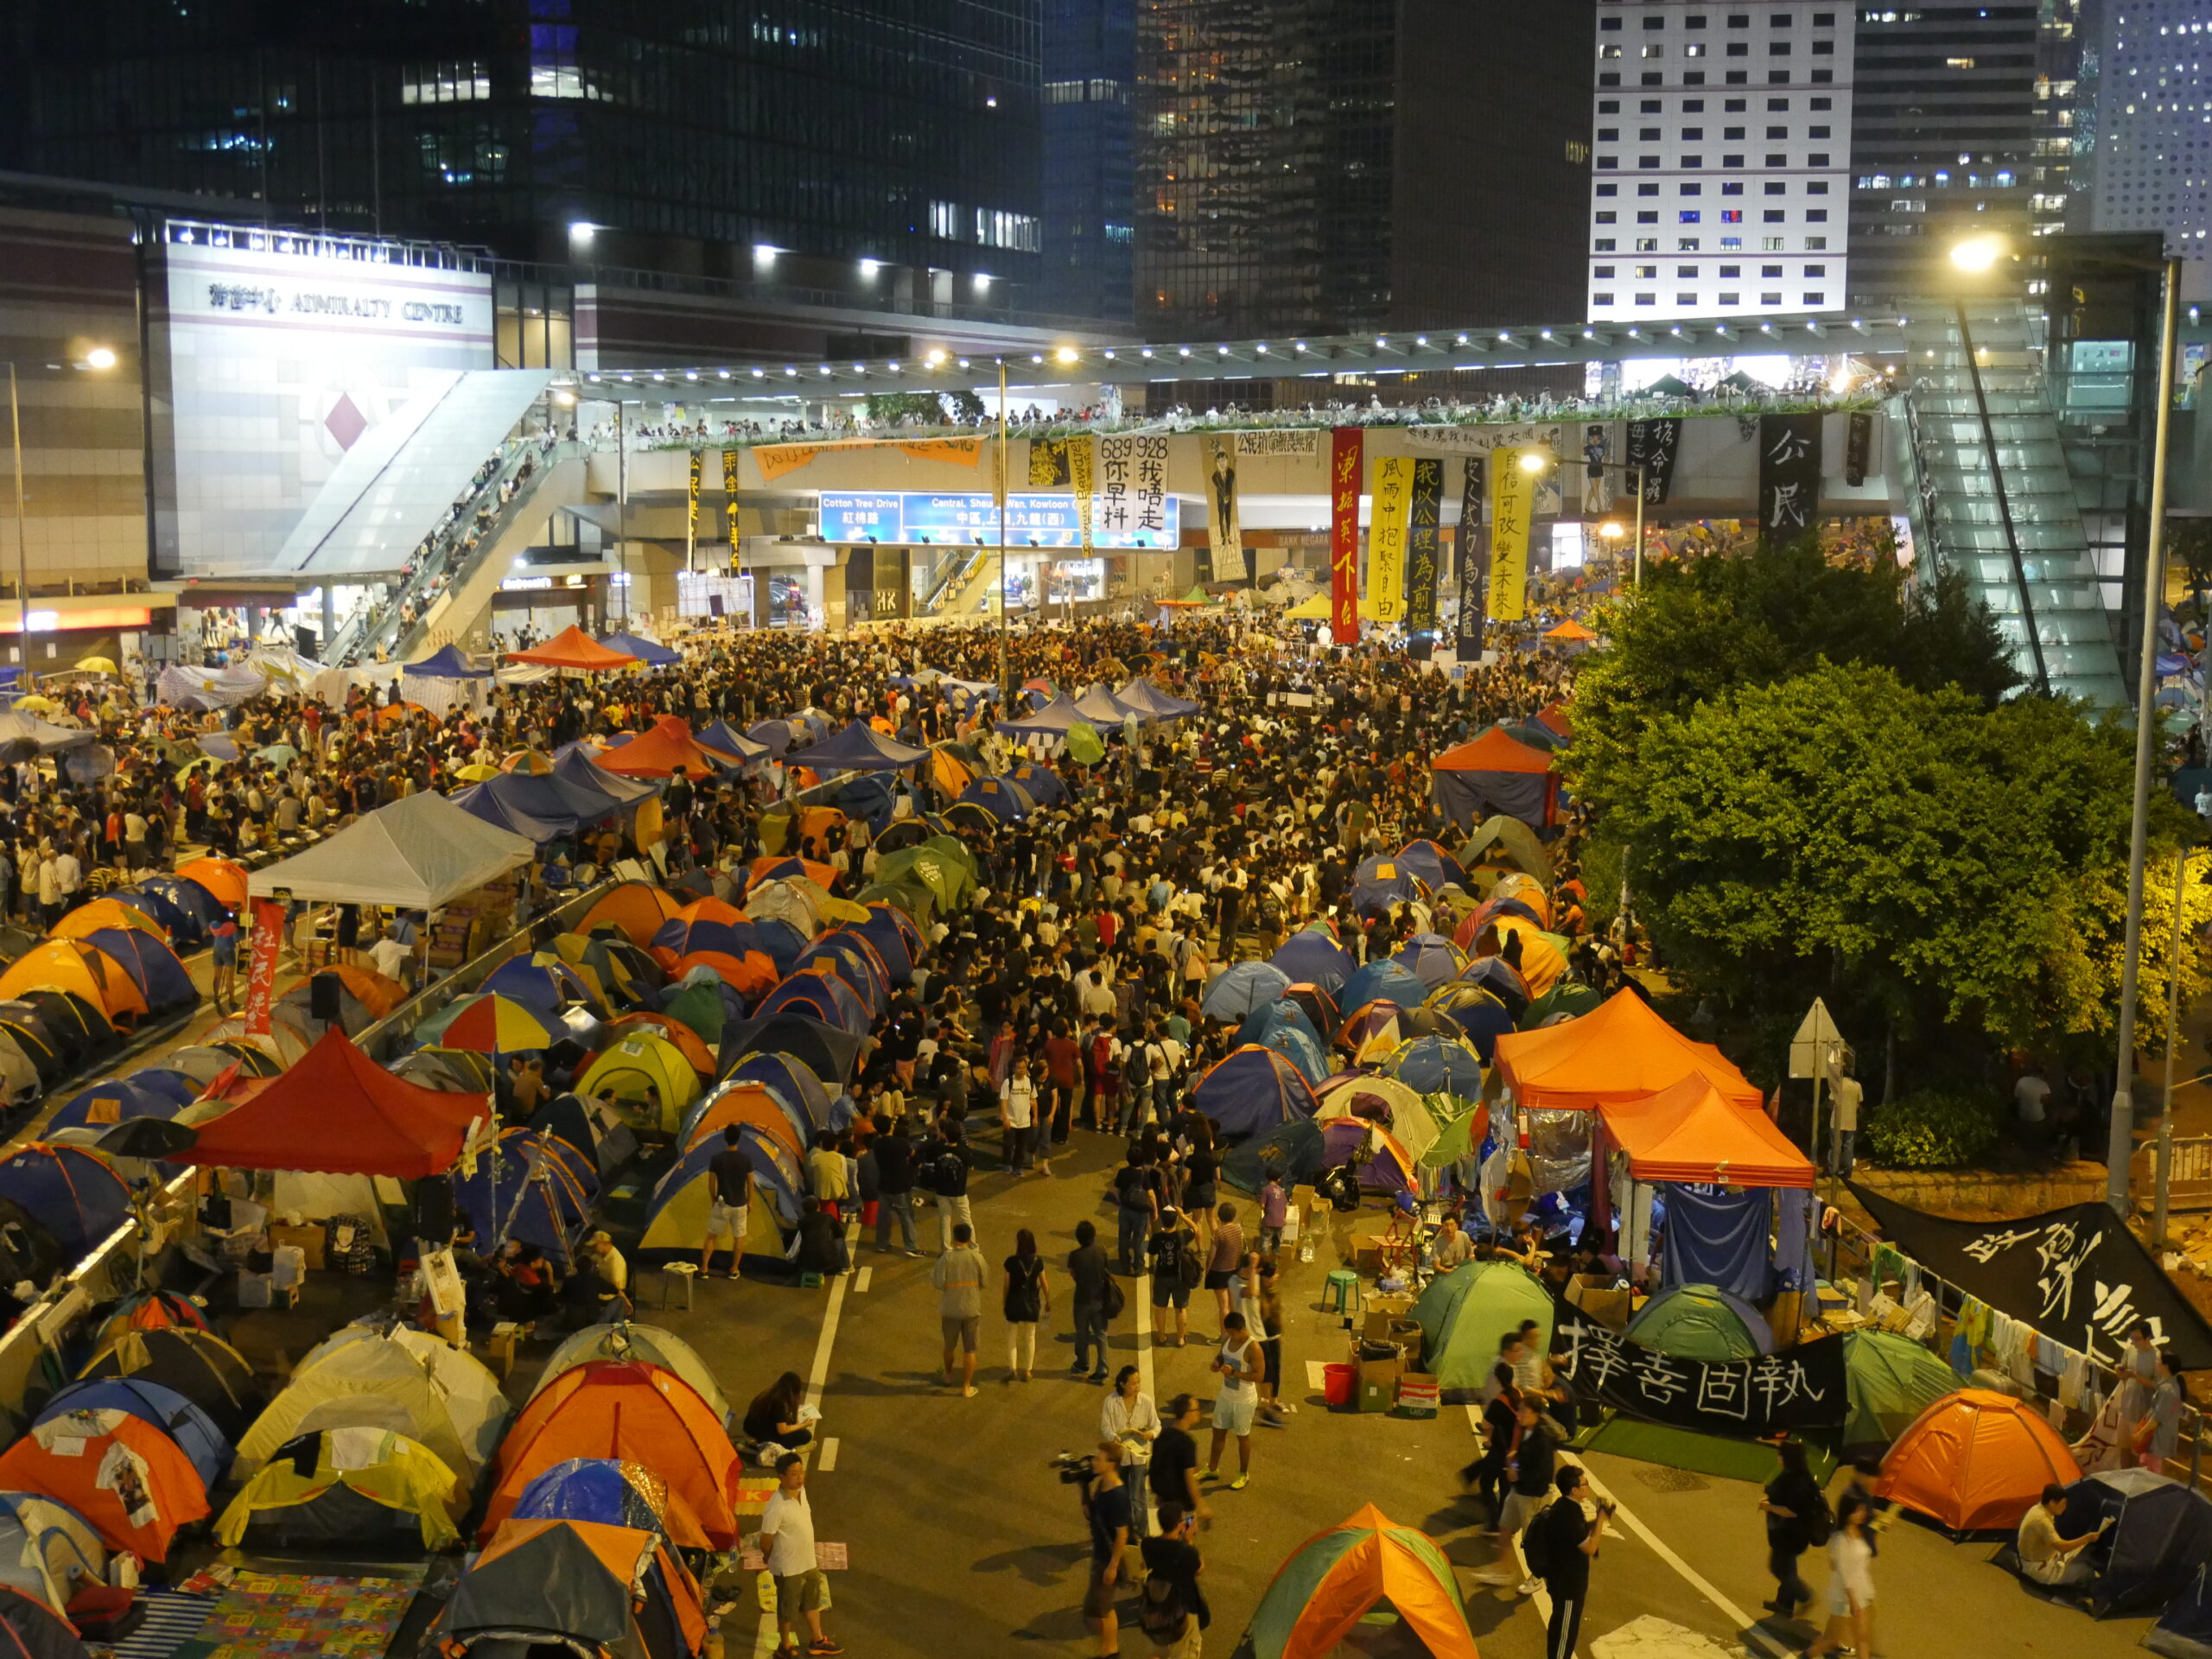 Thousands of protestors gather near the government offices complex in Hong Kong.